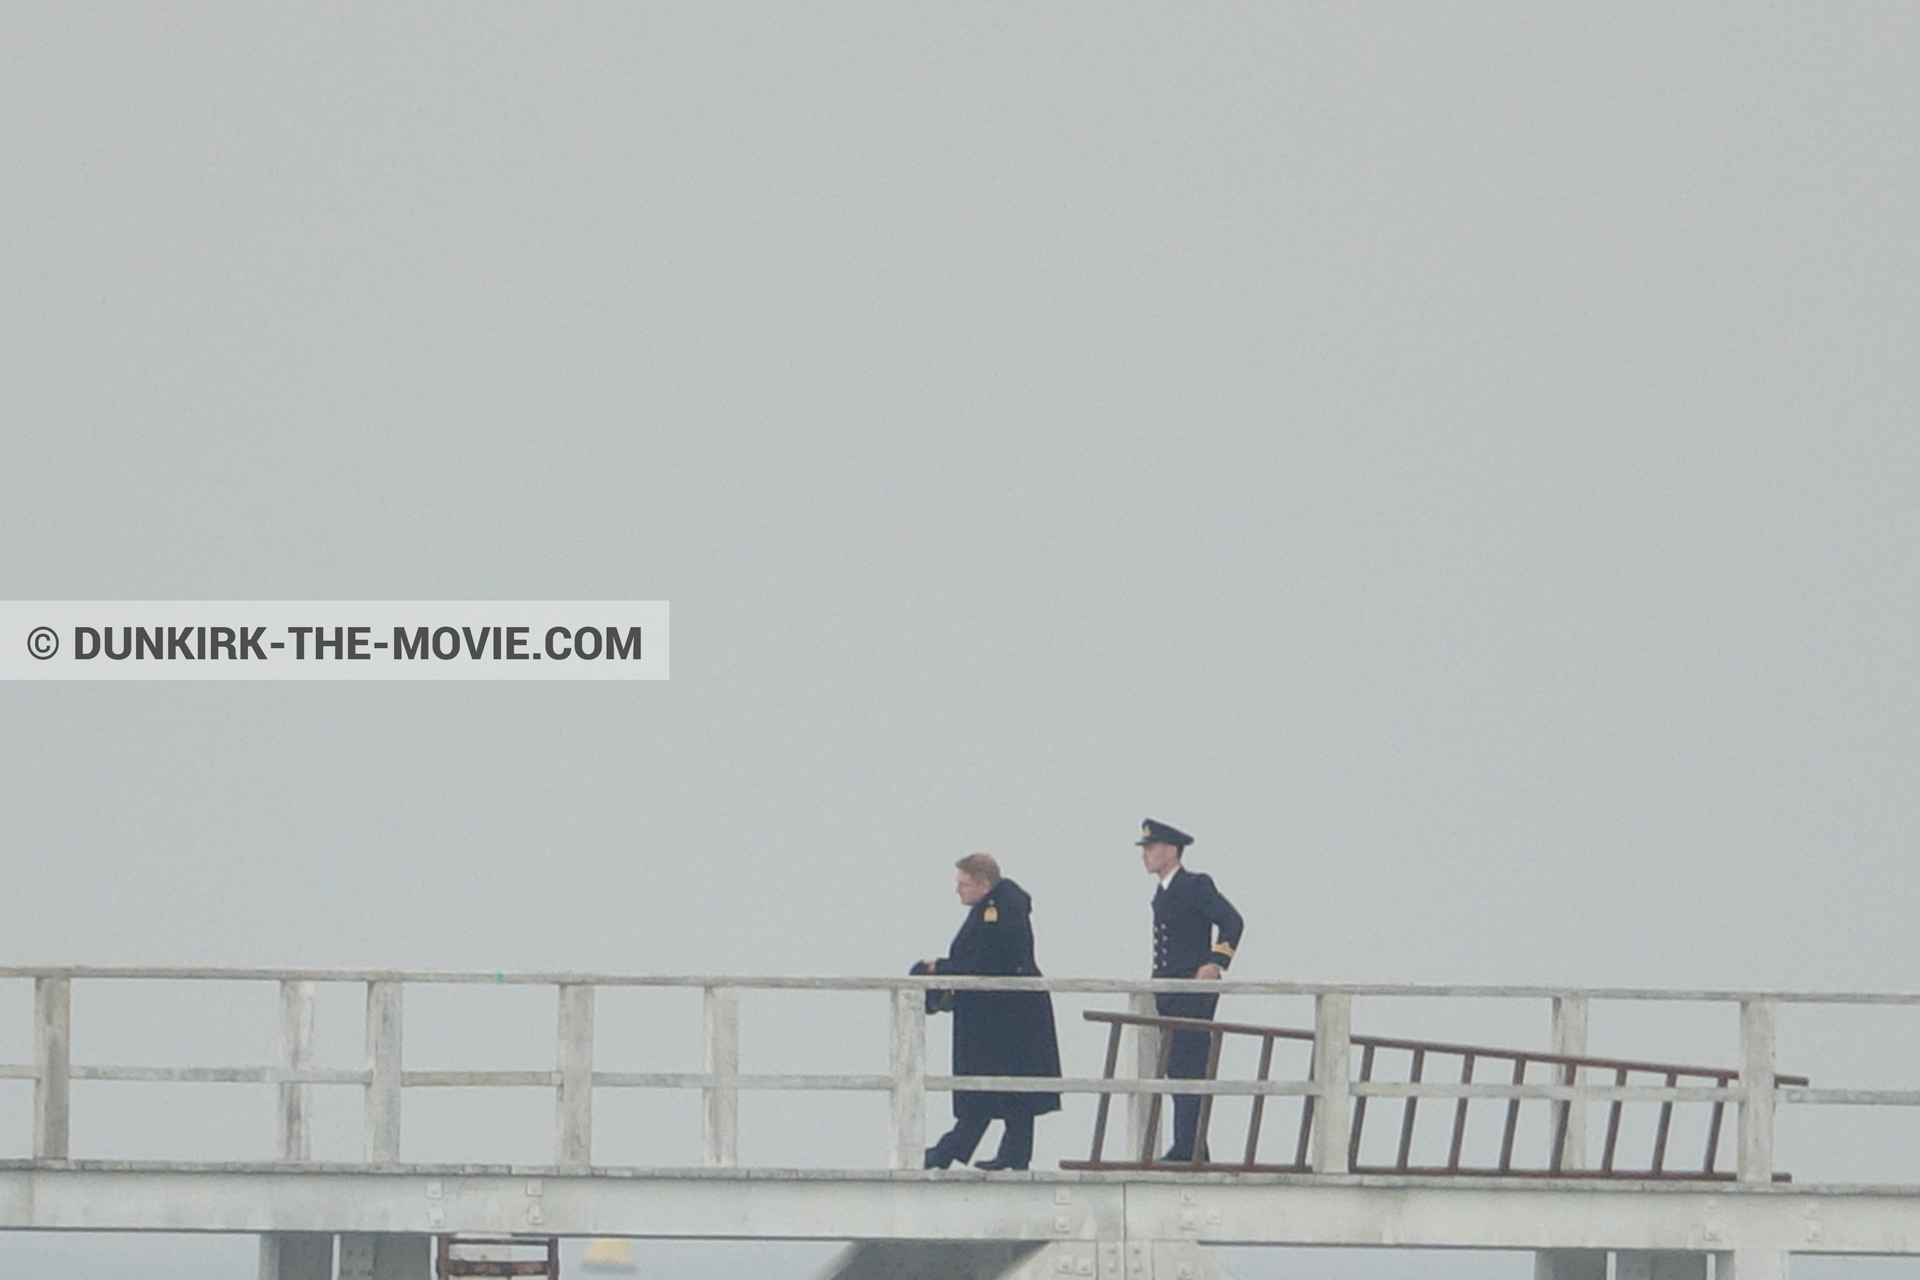 Picture with actor, grey sky, EST pier, Kenneth Branagh,  from behind the scene of the Dunkirk movie by Nolan